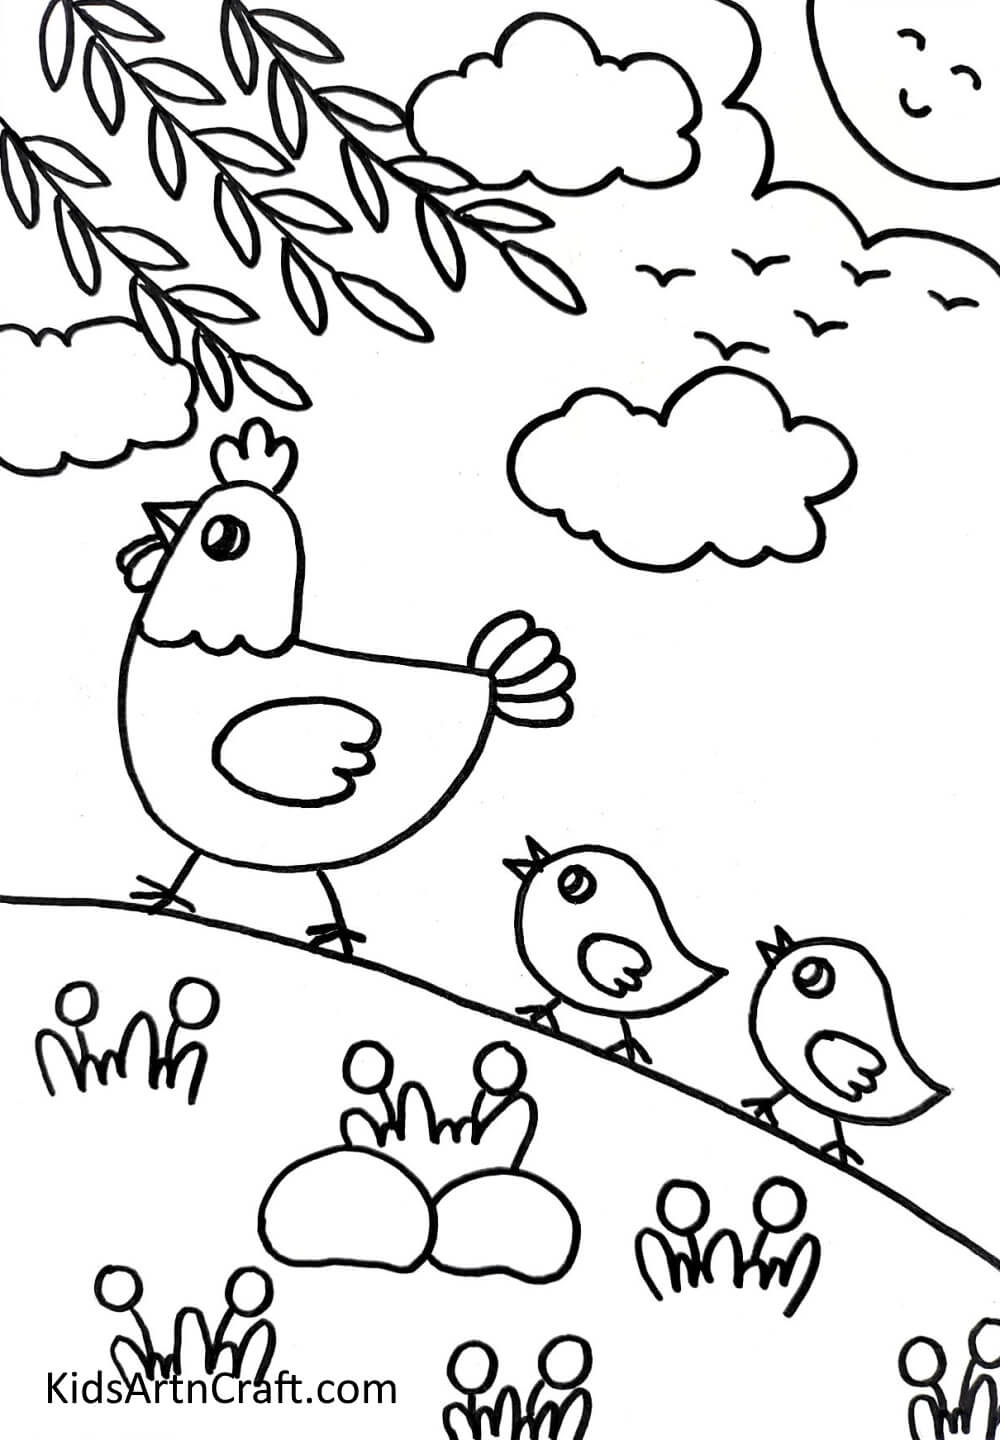 Drawing The Clouds, The Sun, And The Tree Leaves - A suggestion for neophyte artists - Work on a Hen & Chicks Illustration